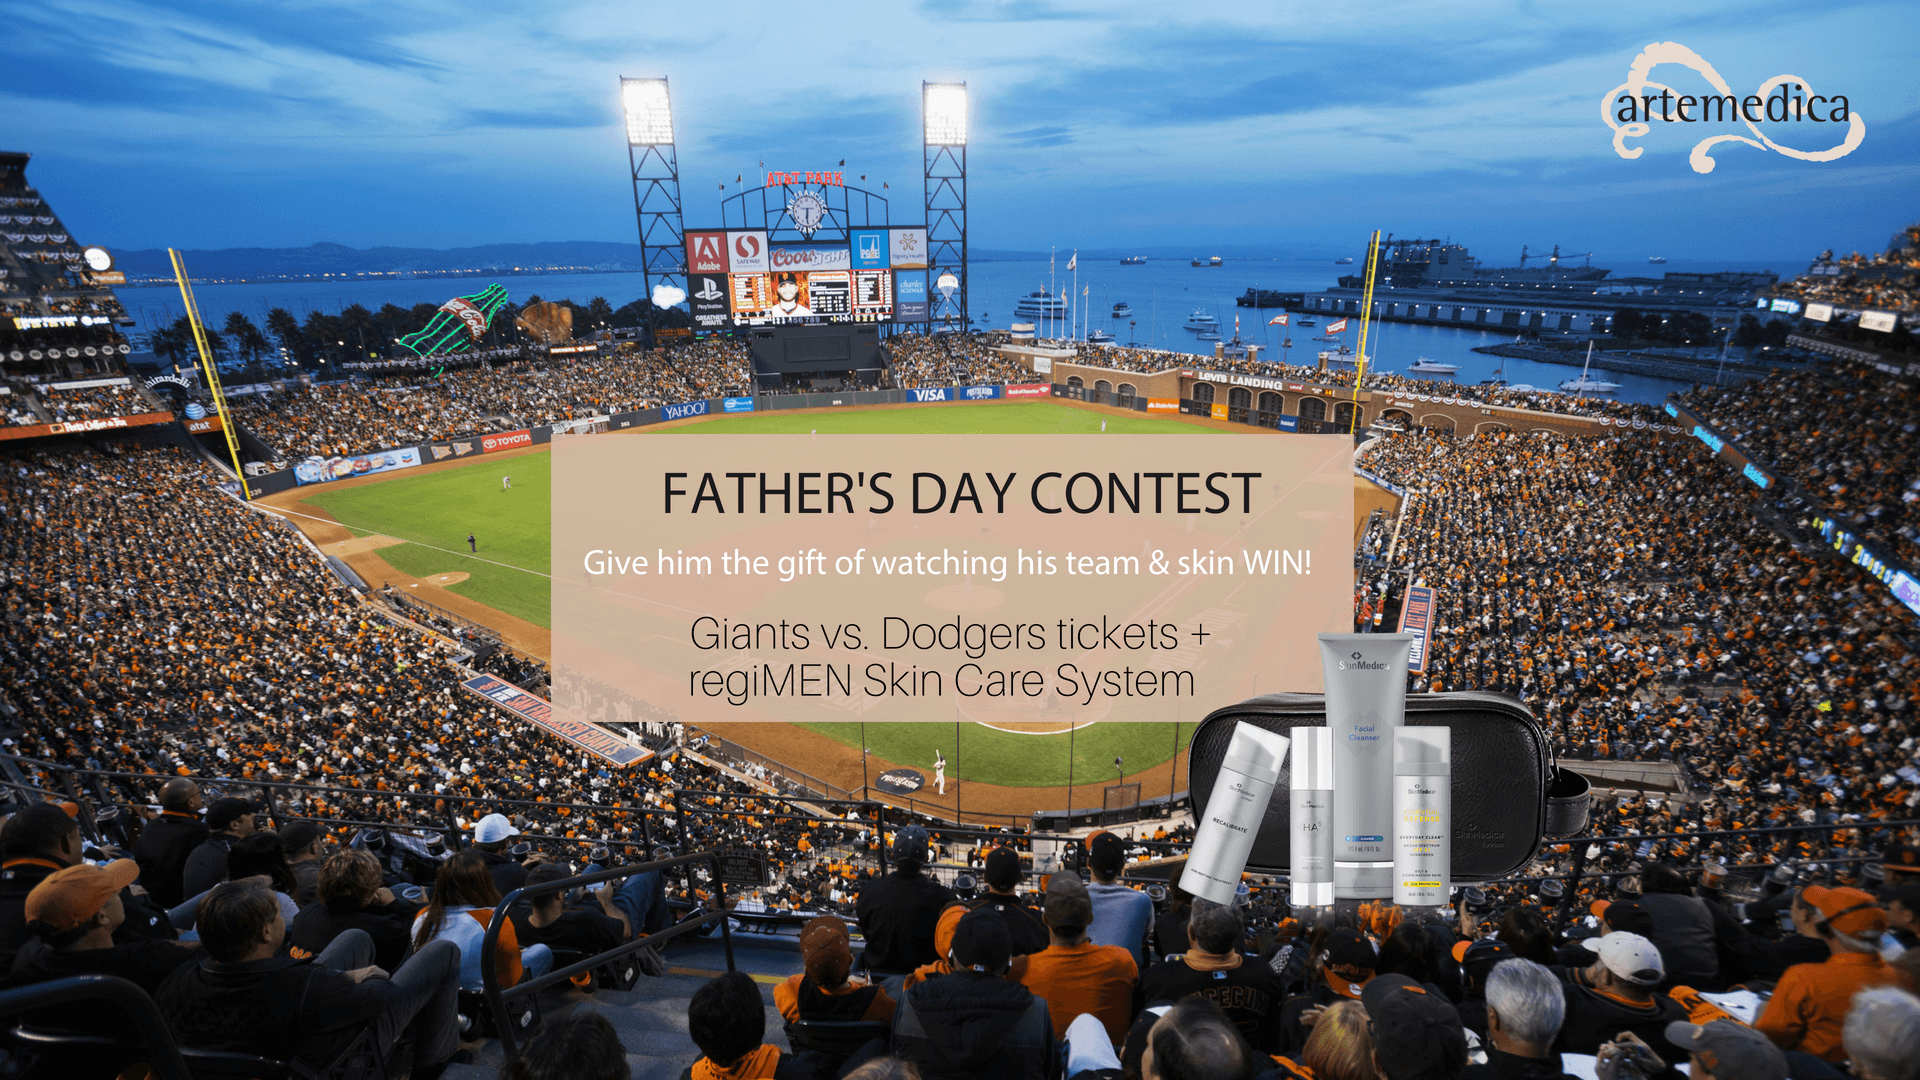 father's day photo contest hosted by artemedica